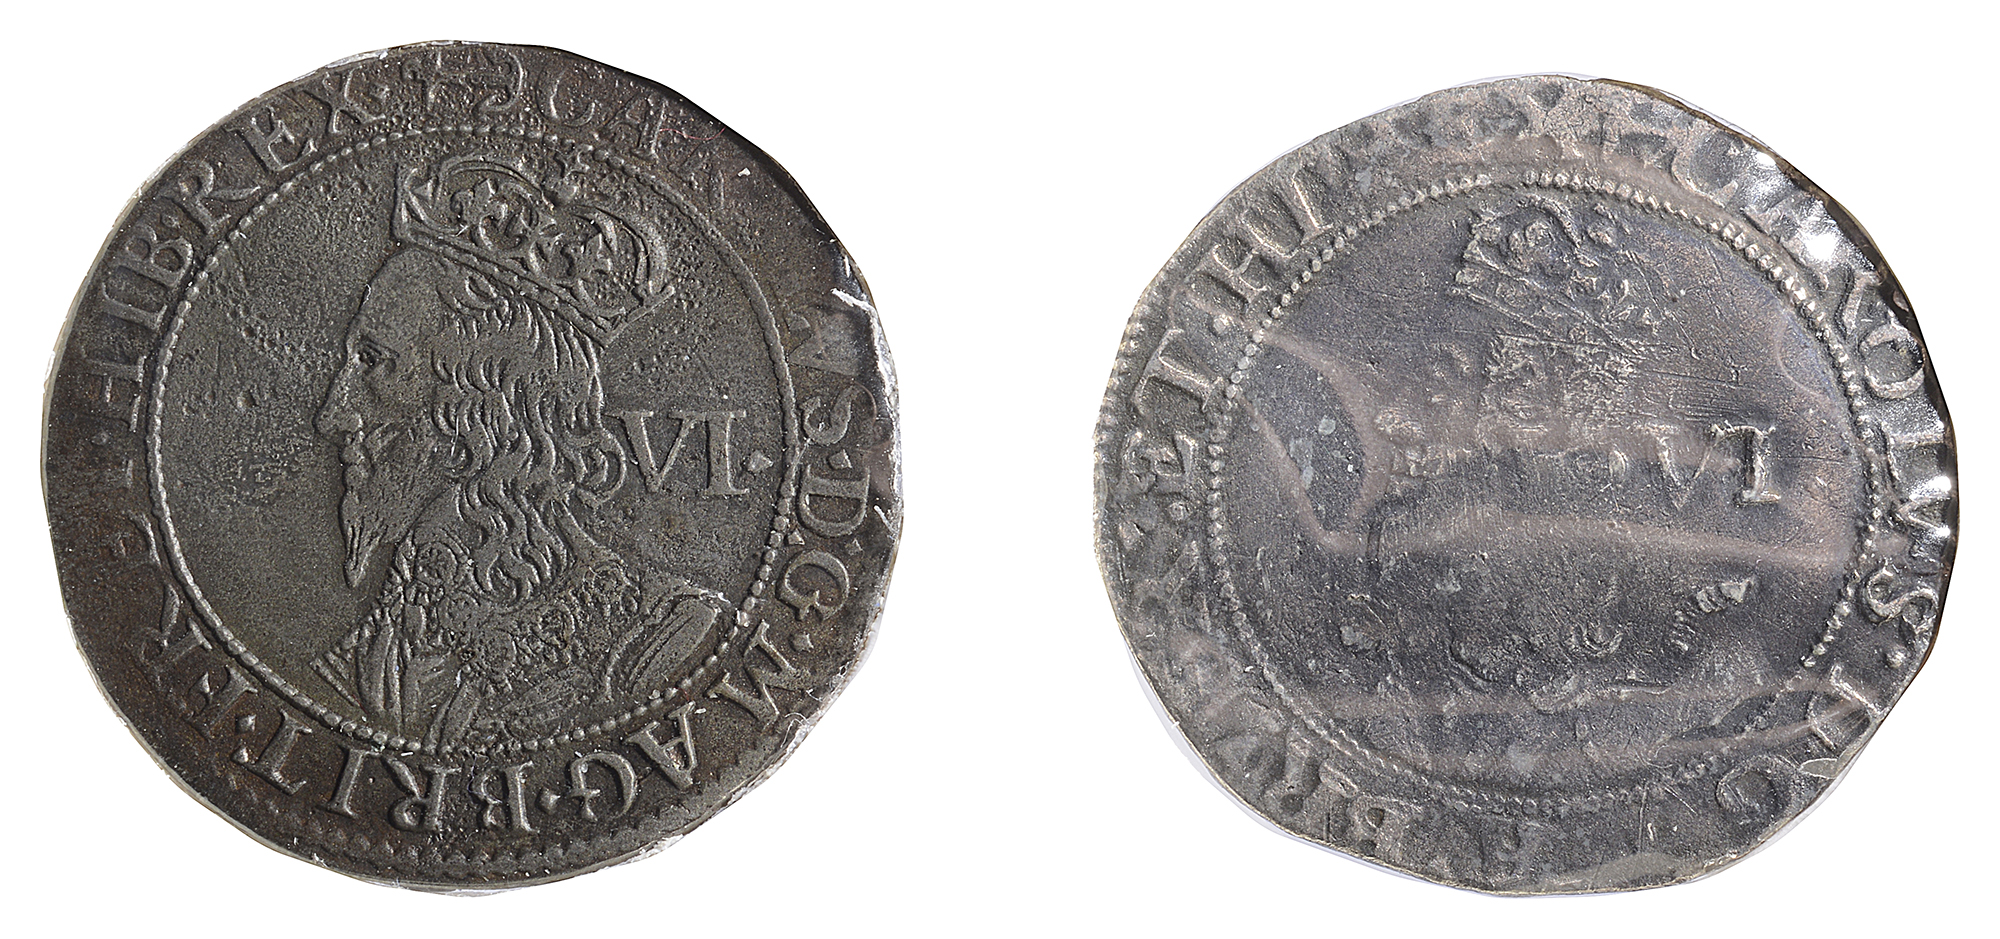 WITHDRAWN Charles I (1625-49) silver sixpencesfirst Briot’s second milled issue (1638-9), mint mark